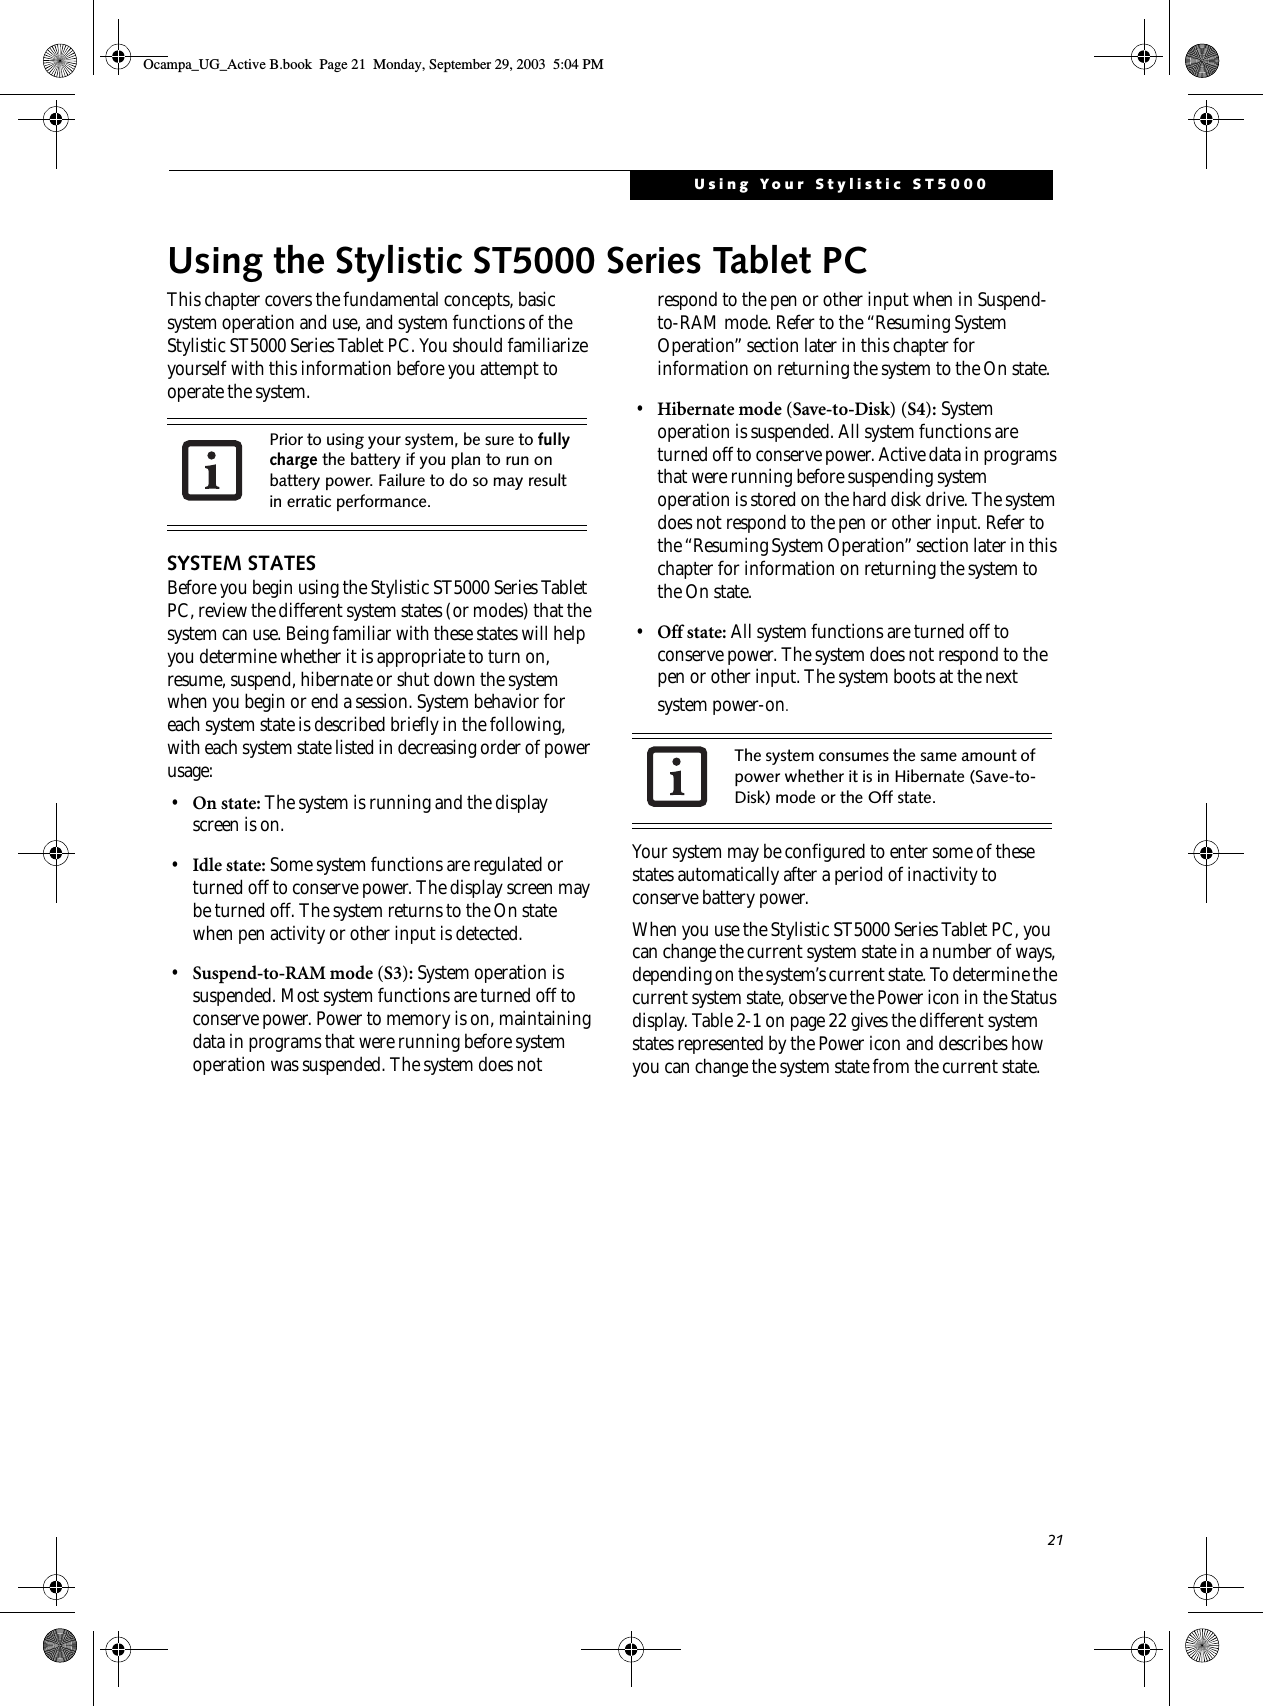 21Using Your Stylistic ST5000Using the Stylistic ST5000 Series Tablet PCThis chapter covers the fundamental concepts, basic system operation and use, and system functions of the Stylistic ST5000 Series Tablet PC. You should familiarize yourself with this information before you attempt to operate the system.SYSTEM STATESBefore you begin using the Stylistic ST5000 Series Tablet PC, review the different system states (or modes) that the system can use. Being familiar with these states will help you determine whether it is appropriate to turn on, resume, suspend, hibernate or shut down the system when you begin or end a session. System behavior for each system state is described briefly in the following, with each system state listed in decreasing order of power usage:•On state: The system is running and the display screen is on. •Idle state: Some system functions are regulated or turned off to conserve power. The display screen may be turned off. The system returns to the On state when pen activity or other input is detected. •Suspend-to-RAM mode (S3): System operation is suspended. Most system functions are turned off to conserve power. Power to memory is on, maintaining data in programs that were running before system operation was suspended. The system does not respond to the pen or other input when in Suspend-to-RAM mode. Refer to the “Resuming System Operation” section later in this chapter for information on returning the system to the On state.•Hibernate mode (Save-to-Disk) (S4): System operation is suspended. All system functions are turned off to conserve power. Active data in programs that were running before suspending system operation is stored on the hard disk drive. The system does not respond to the pen or other input. Refer to the “Resuming System Operation” section later in this chapter for information on returning the system to the On state.•Off state: All system functions are turned off to conserve power. The system does not respond to the pen or other input. The system boots at the next system power-on.Your system may be configured to enter some of these states automatically after a period of inactivity to conserve battery power. When you use the Stylistic ST5000 Series Tablet PC, you can change the current system state in a number of ways, depending on the system’s current state. To determine the current system state, observe the Power icon in the Status display. Table 2-1 on page 22 gives the different system states represented by the Power icon and describes how you can change the system state from the current state.Prior to using your system, be sure to fully charge the battery if you plan to run on battery power. Failure to do so may result in erratic performance. The system consumes the same amount of power whether it is in Hibernate (Save-to-Disk) mode or the Off state. Ocampa_UG_Active B.book  Page 21  Monday, September 29, 2003  5:04 PM